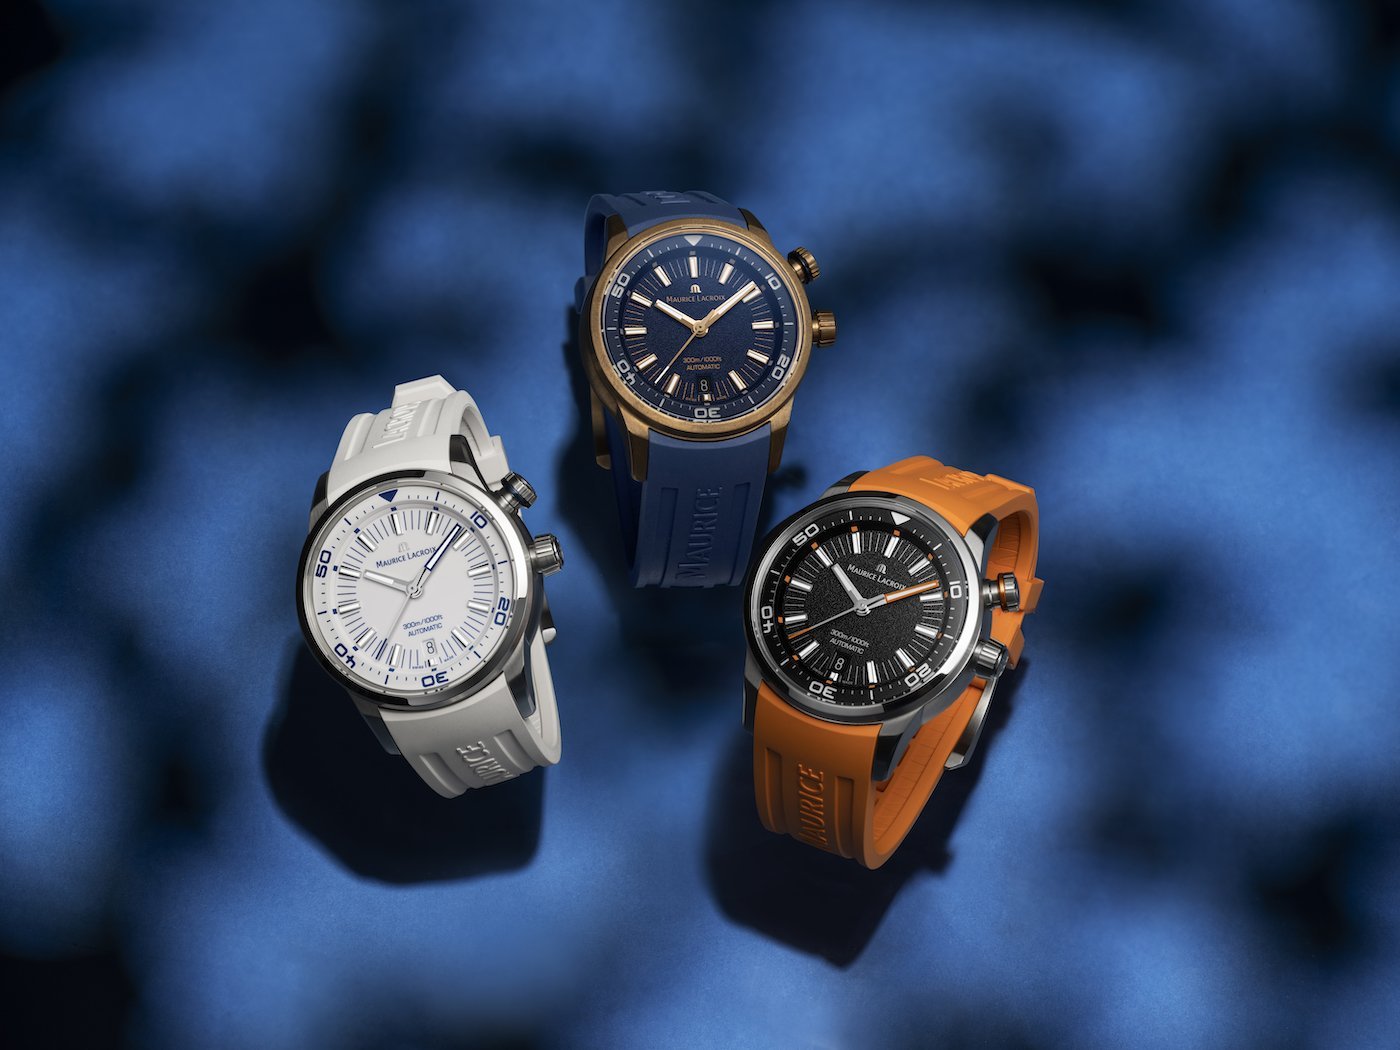 With the Pontos S Diver, Maurice Lacroix relaunches a key line